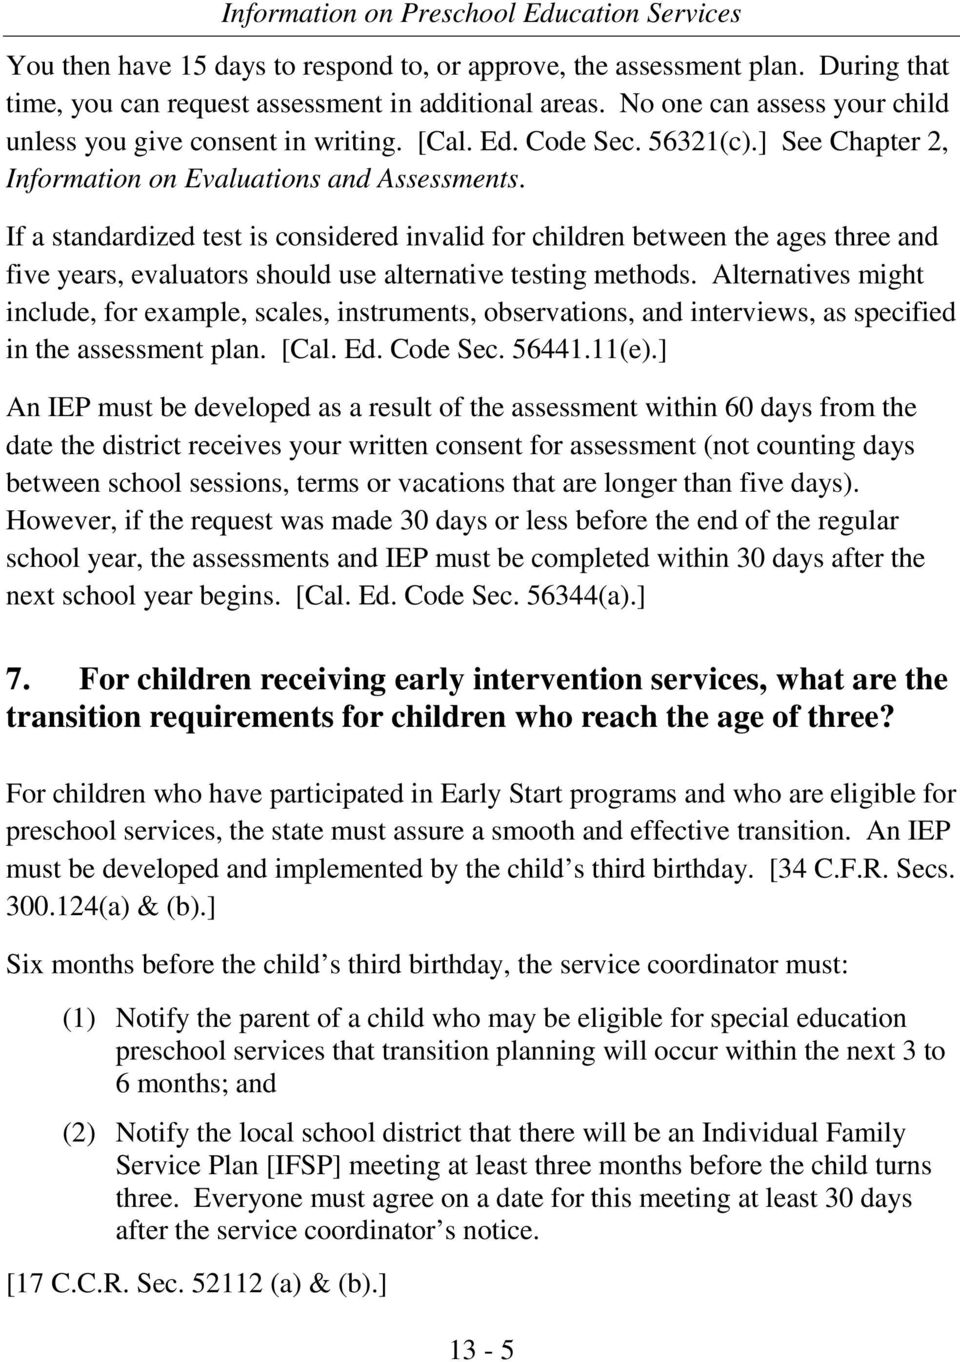 If a standardized test is considered invalid for children between the ages three and five years, evaluators should use alternative testing methods.